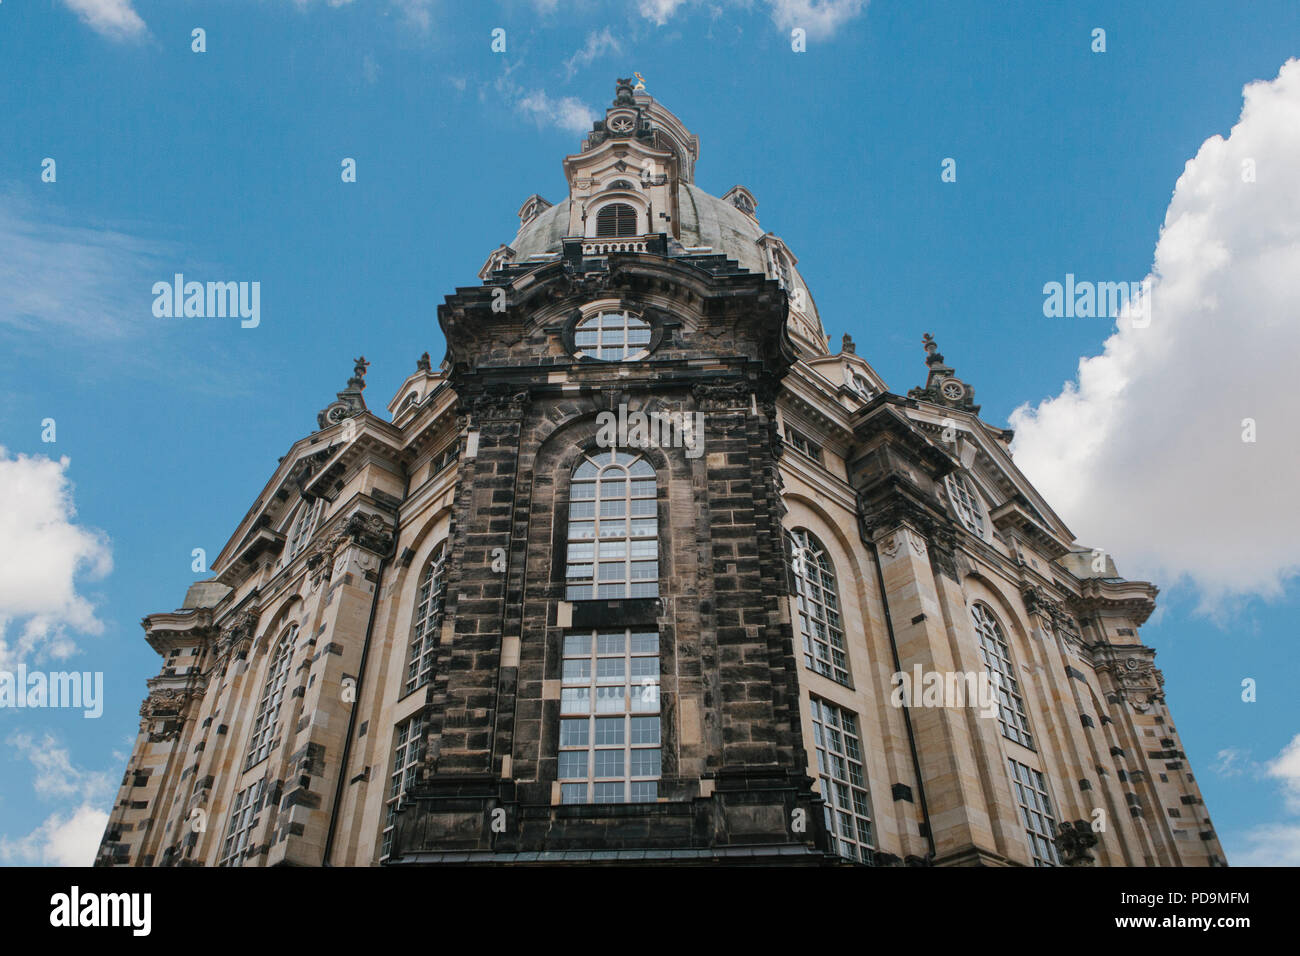 The church is called Frauenkirche against the blue sky in Dresden in Germany. Stock Photo